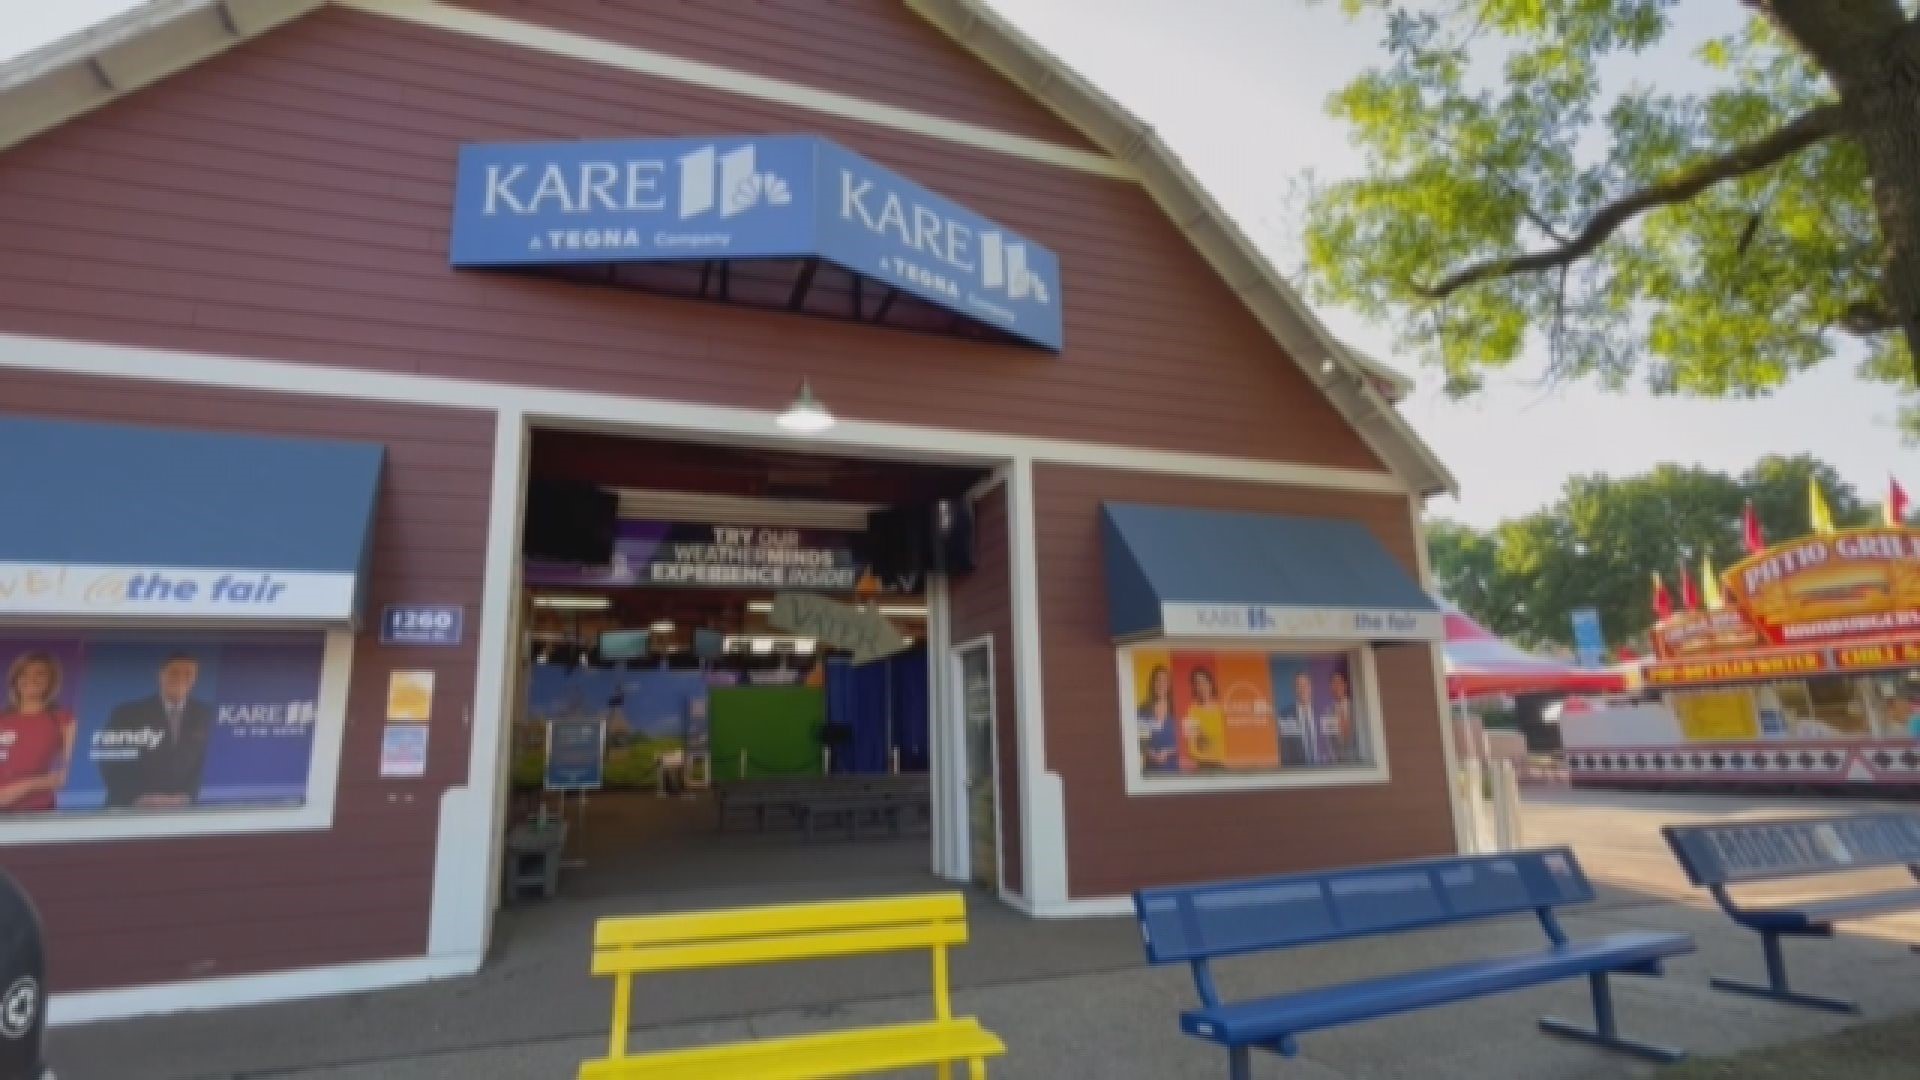 While some things are a bit different at the 2021 Minnesota State Fair, the KARE 11 Barn is open for business, with all kinds of cool reasons to visit.